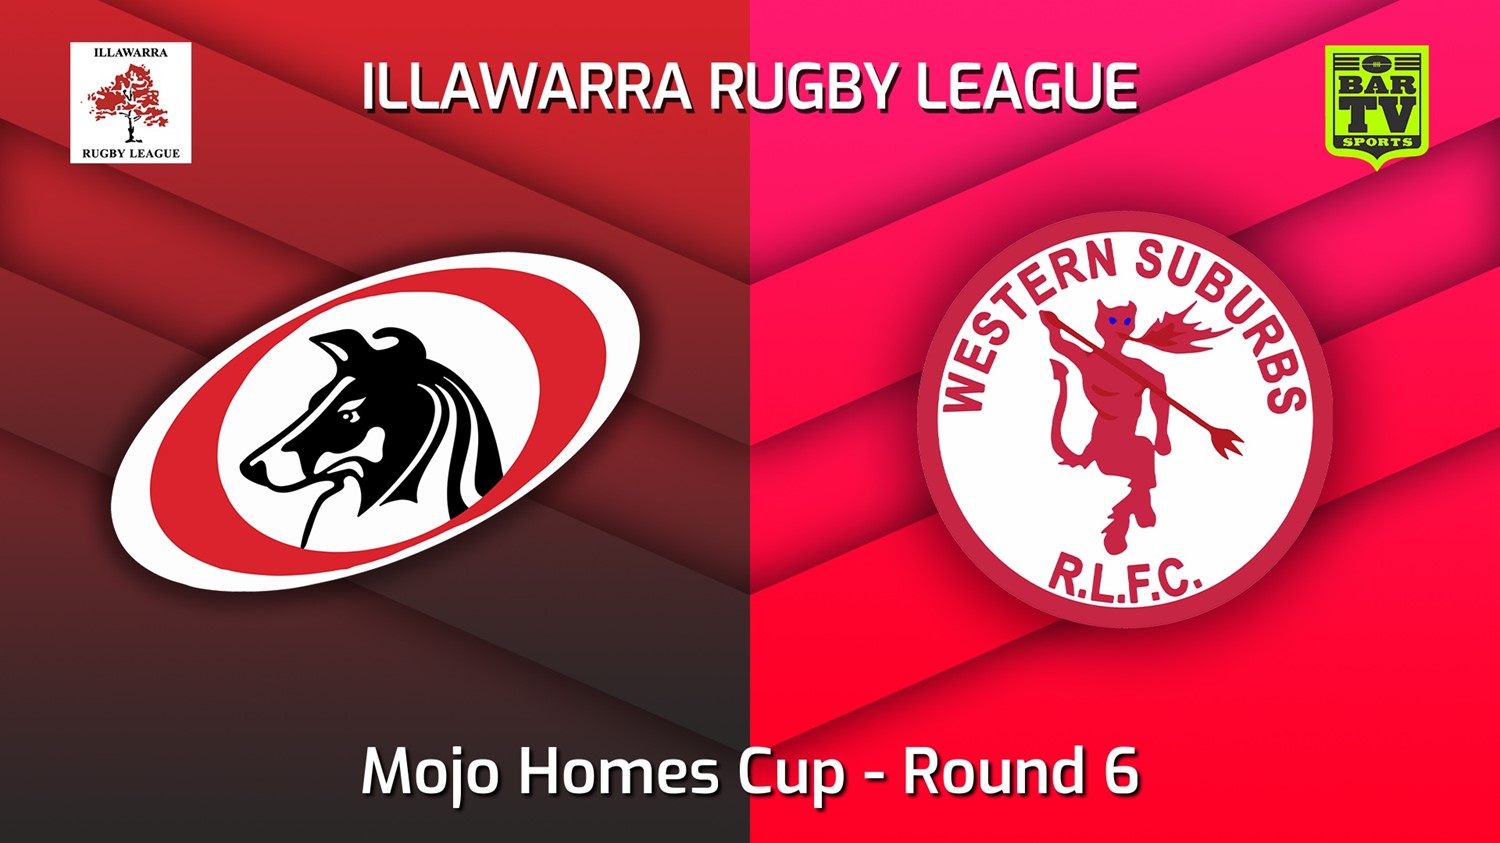 220604-Illawarra Round 6 - Mojo Homes Cup - Collegians v Western Suburbs Devils Minigame Slate Image